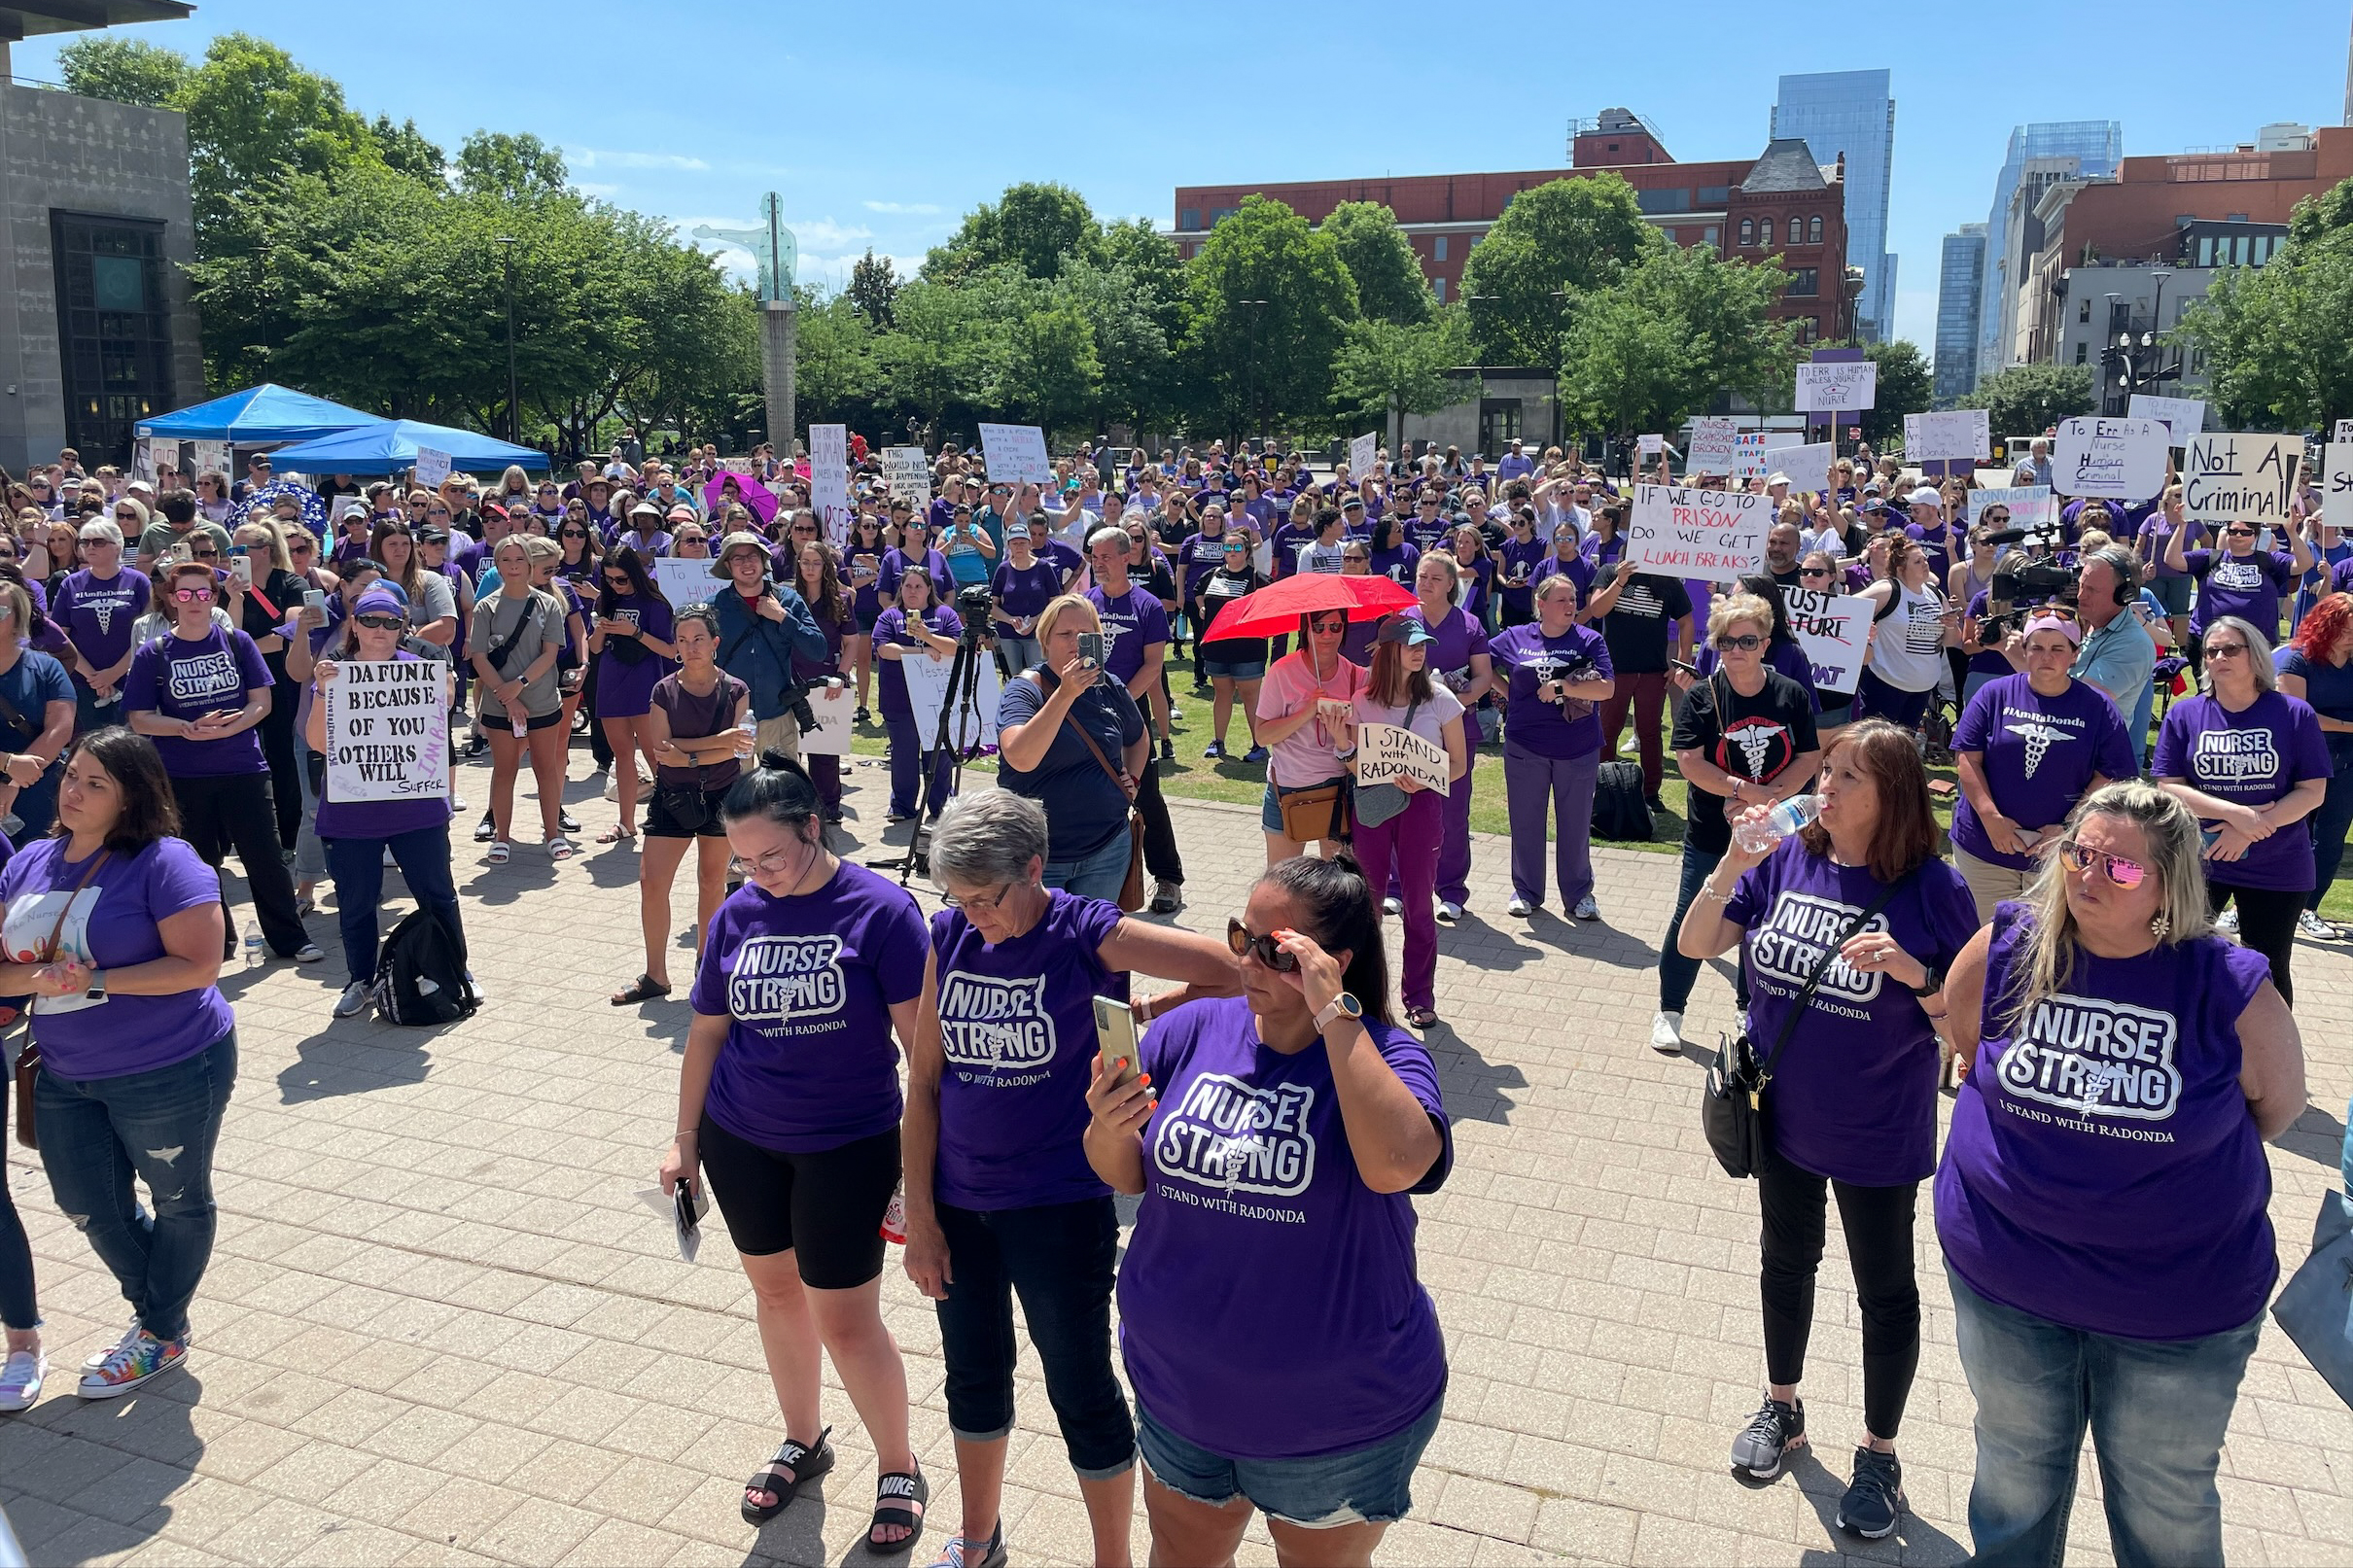 Hundreds of people gather near the Davidson County Courthouse in Nashville.  The protesters wear purple shirts that read, "Nurse strong.  I stand with Radonda."